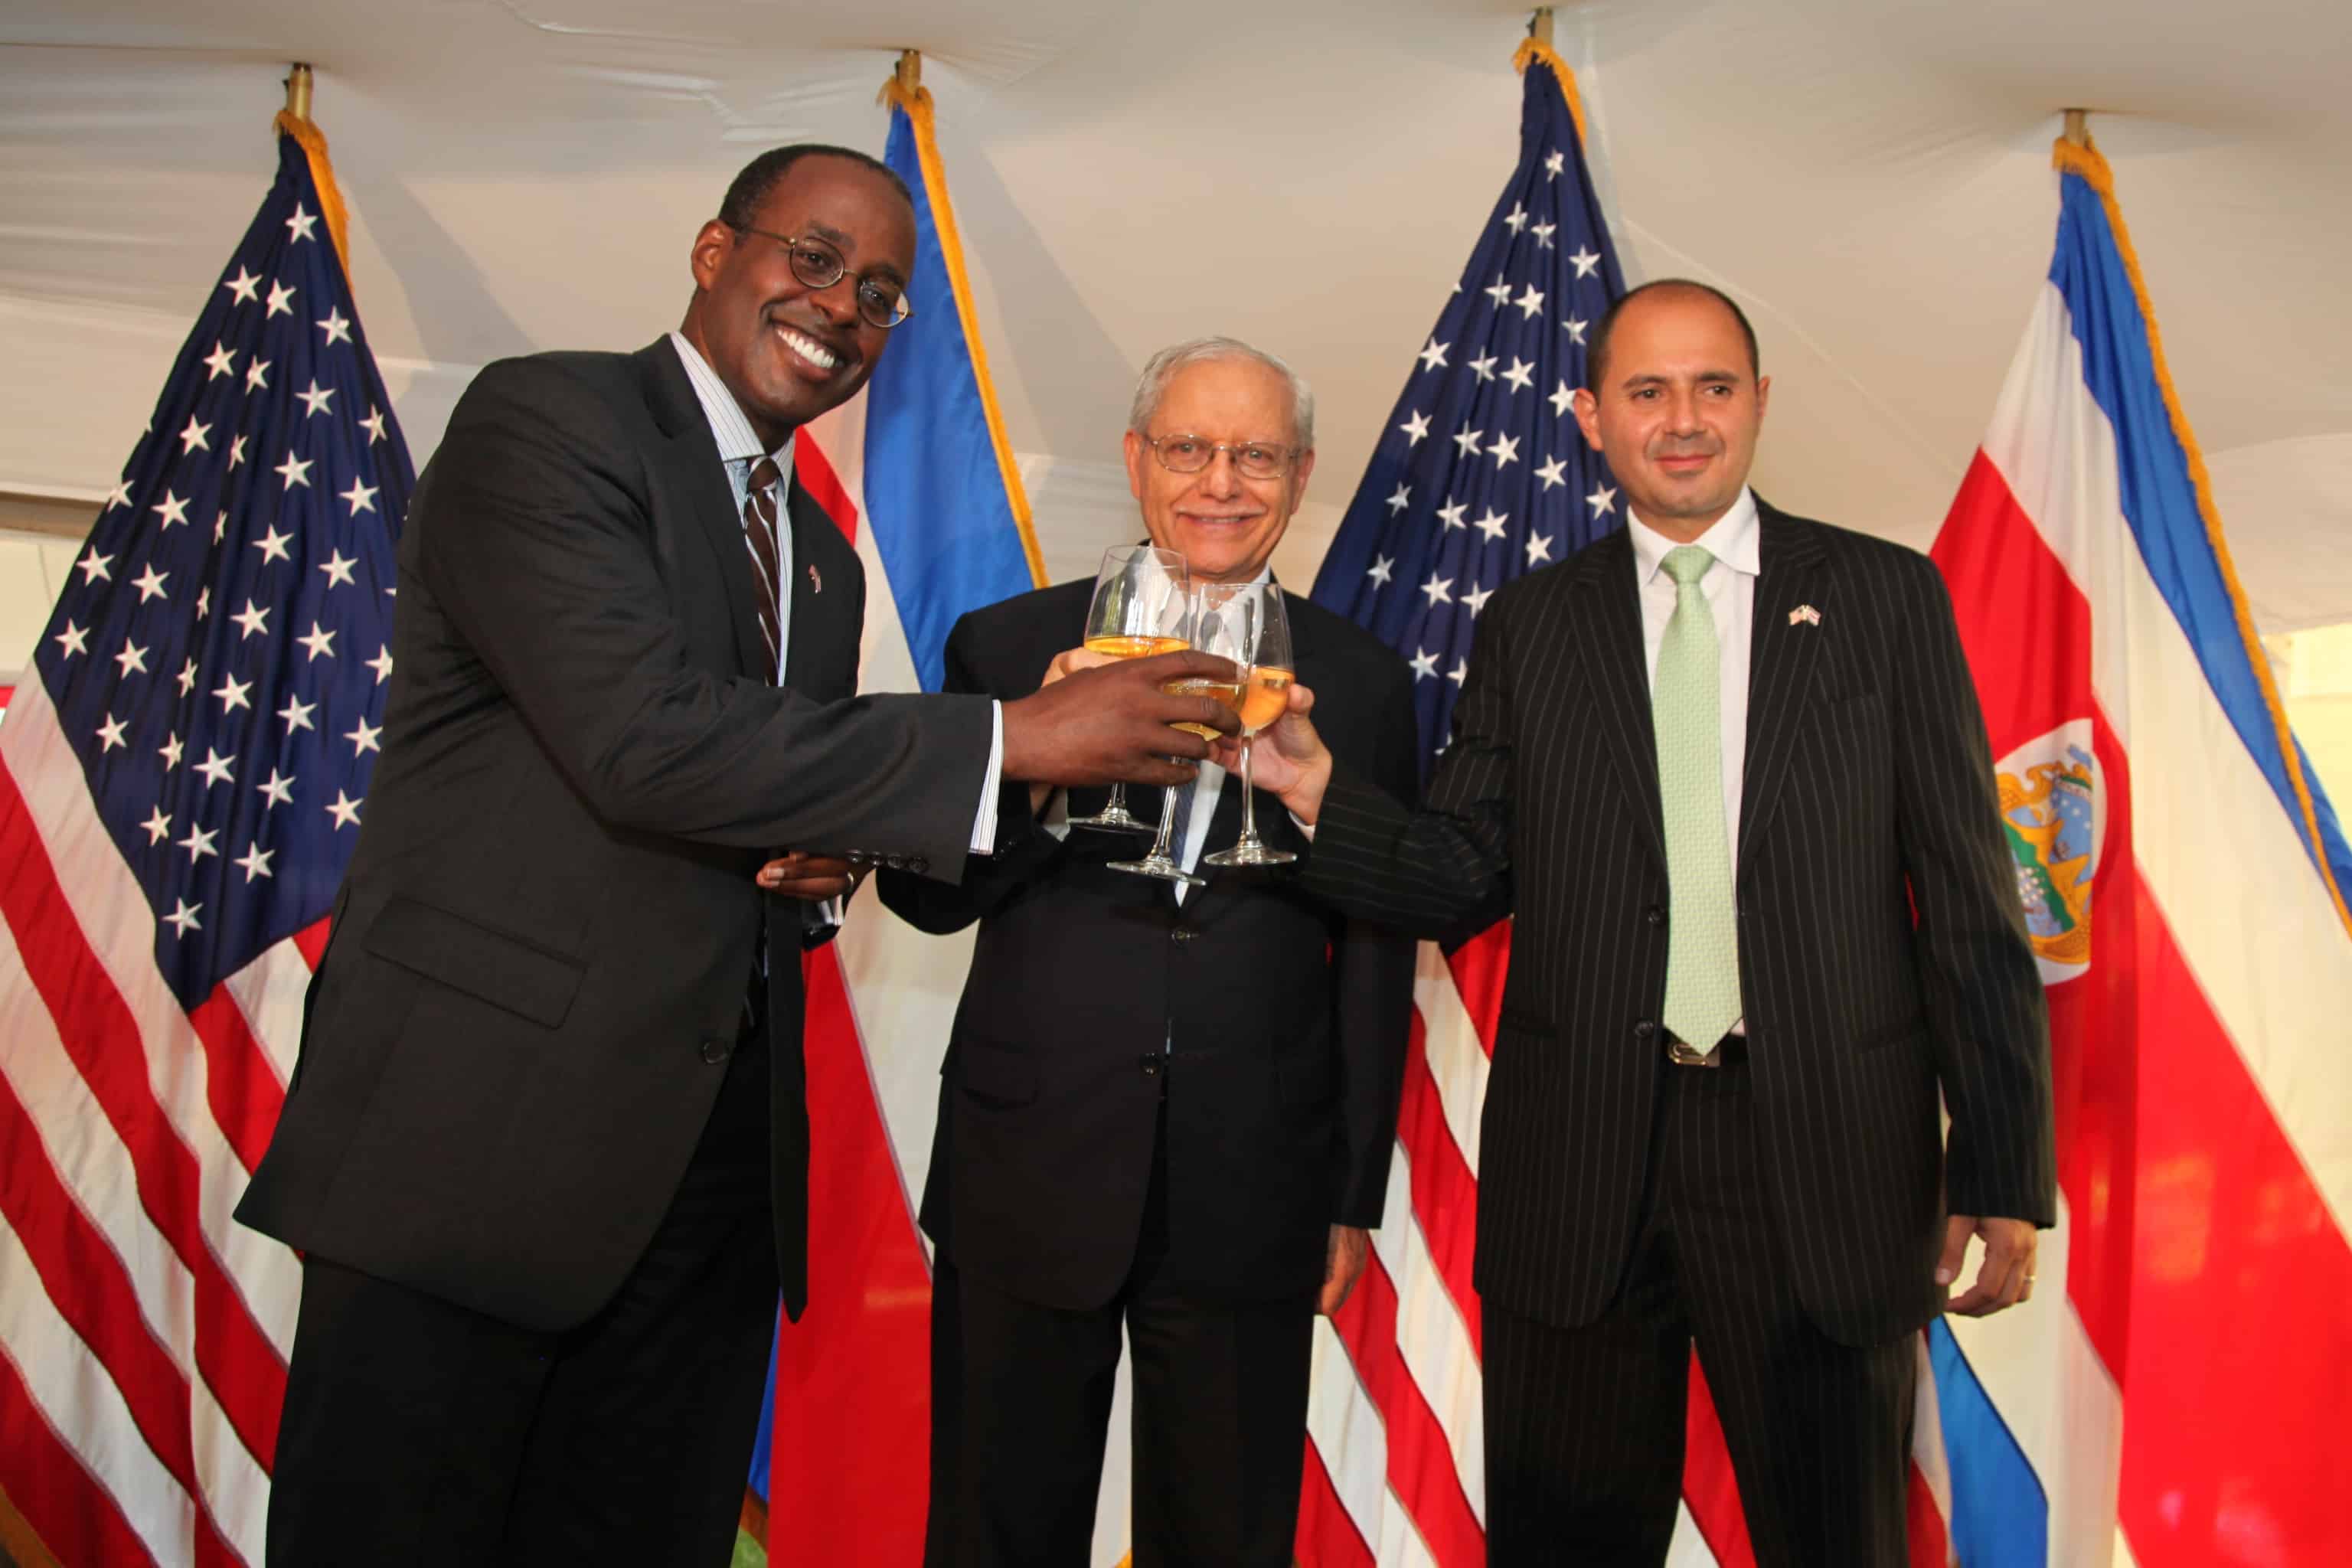 From left to right: U.S. Ambassador to Costa Rica S. Fitzgerald Haney, Costa Rican Vice President Helio Fallas, and Costa Rica's acting Foreign Minister Alejandro Solano on July 2, 2015.